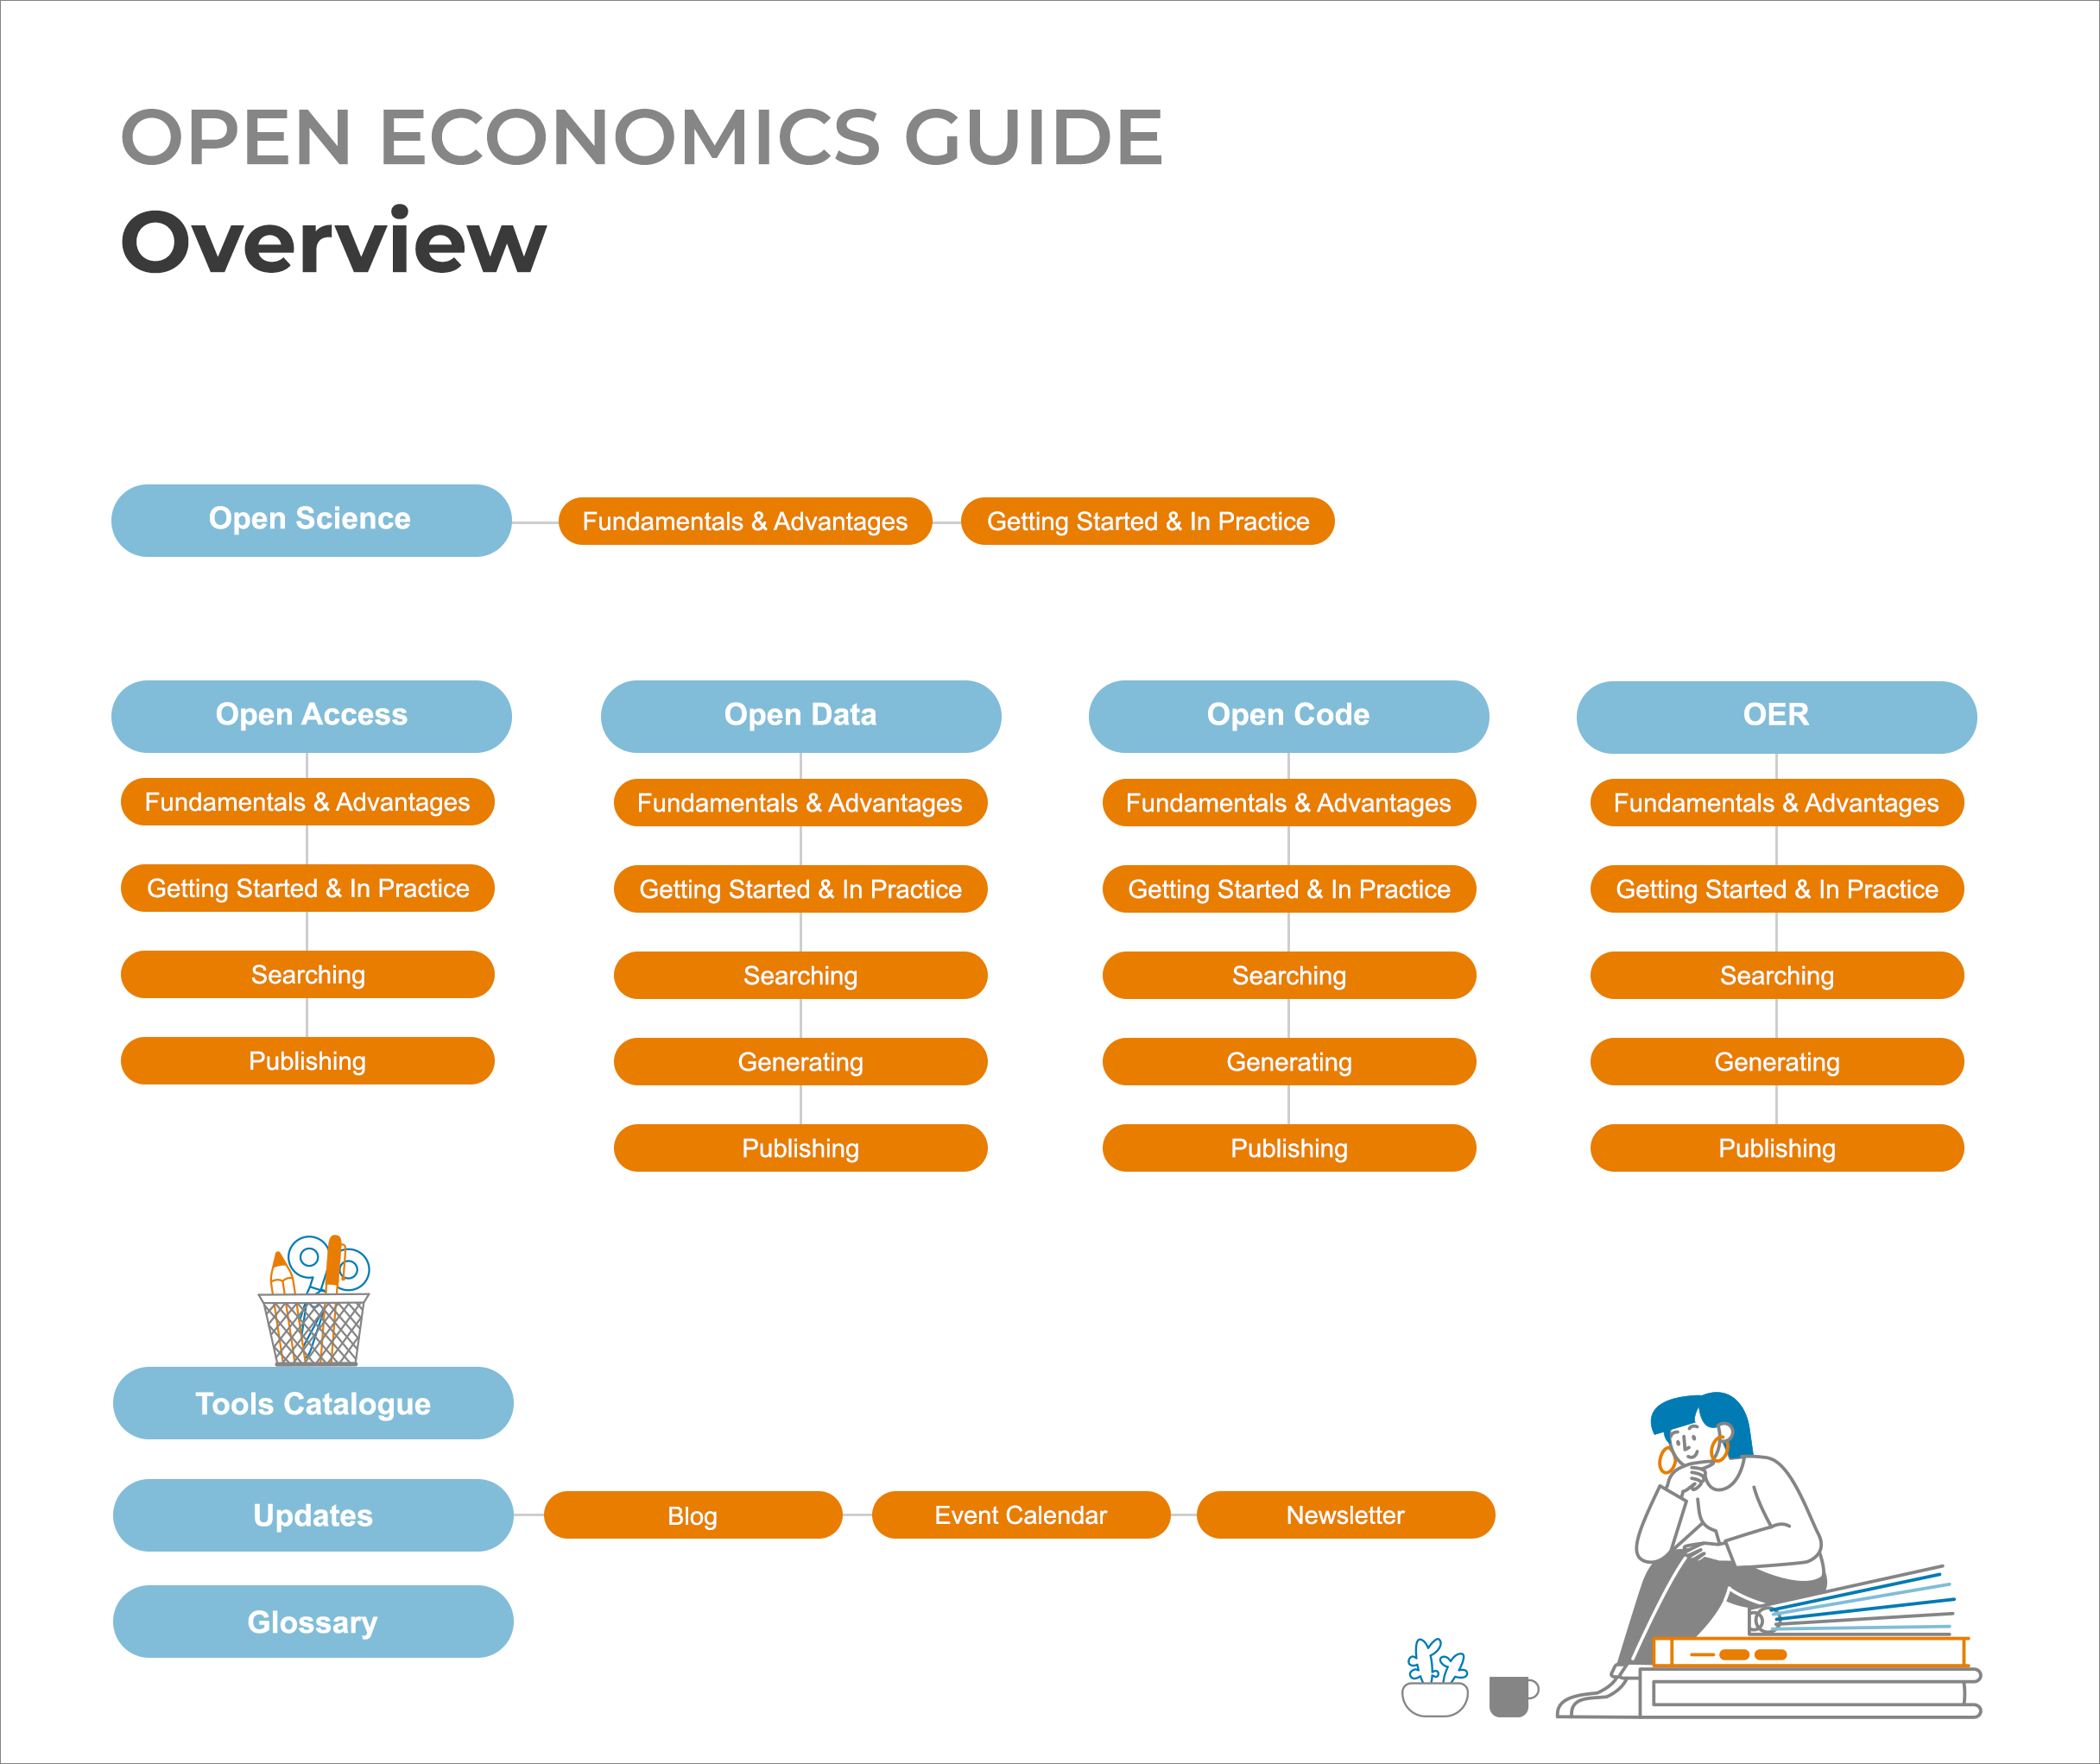 Sidemap of the themes of the Open Economic Guide